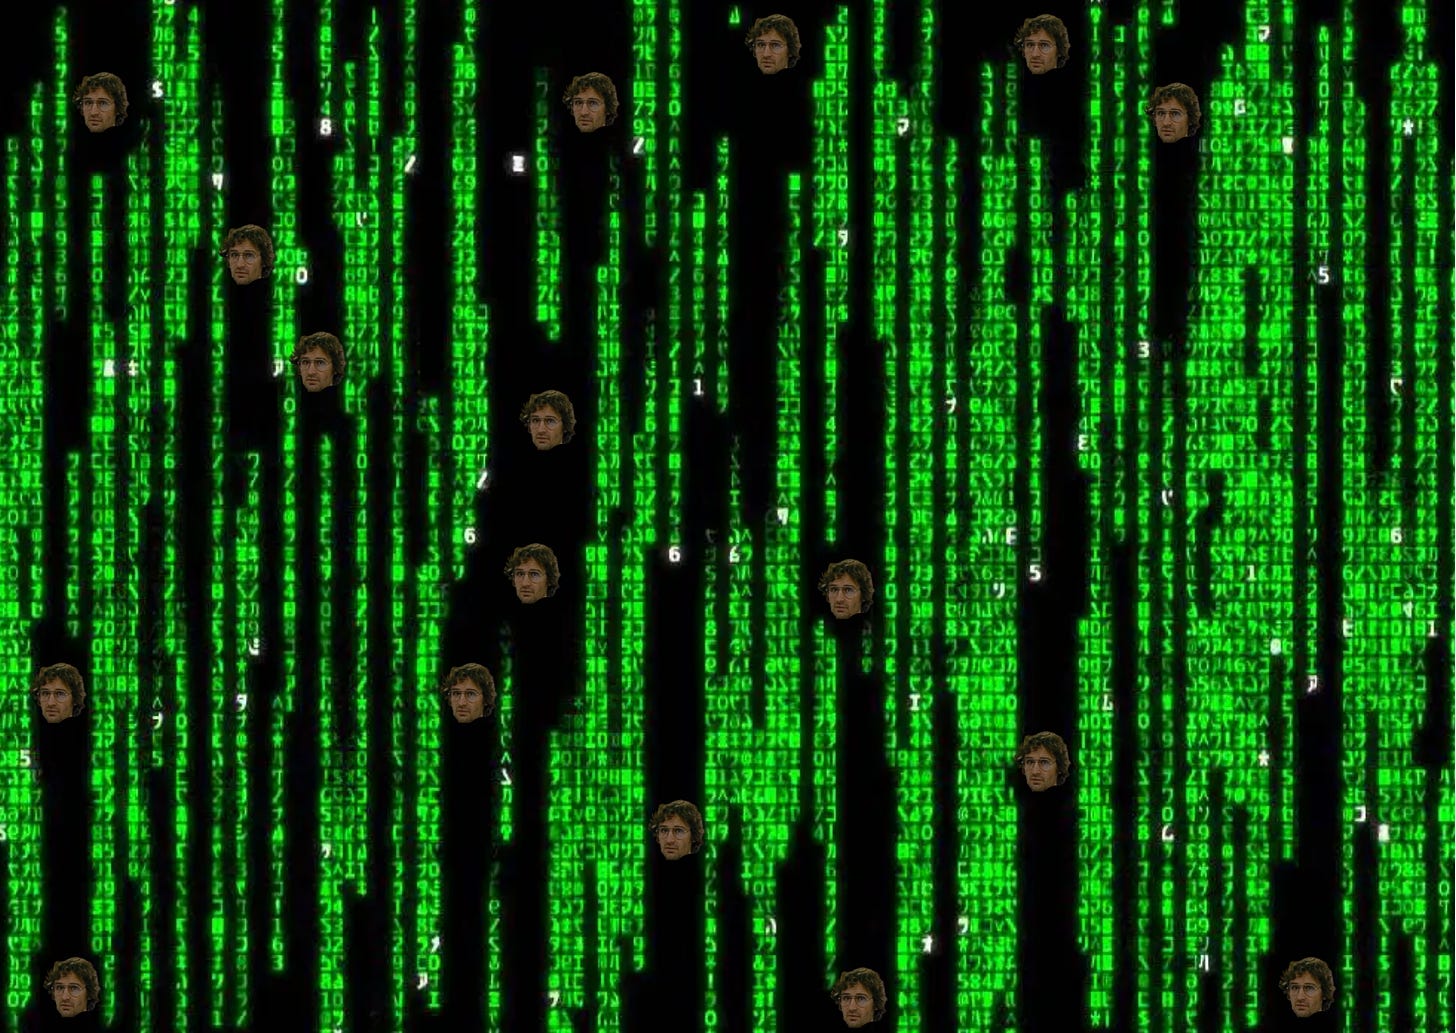 Matrix green text with David Koresh heads scattered through it